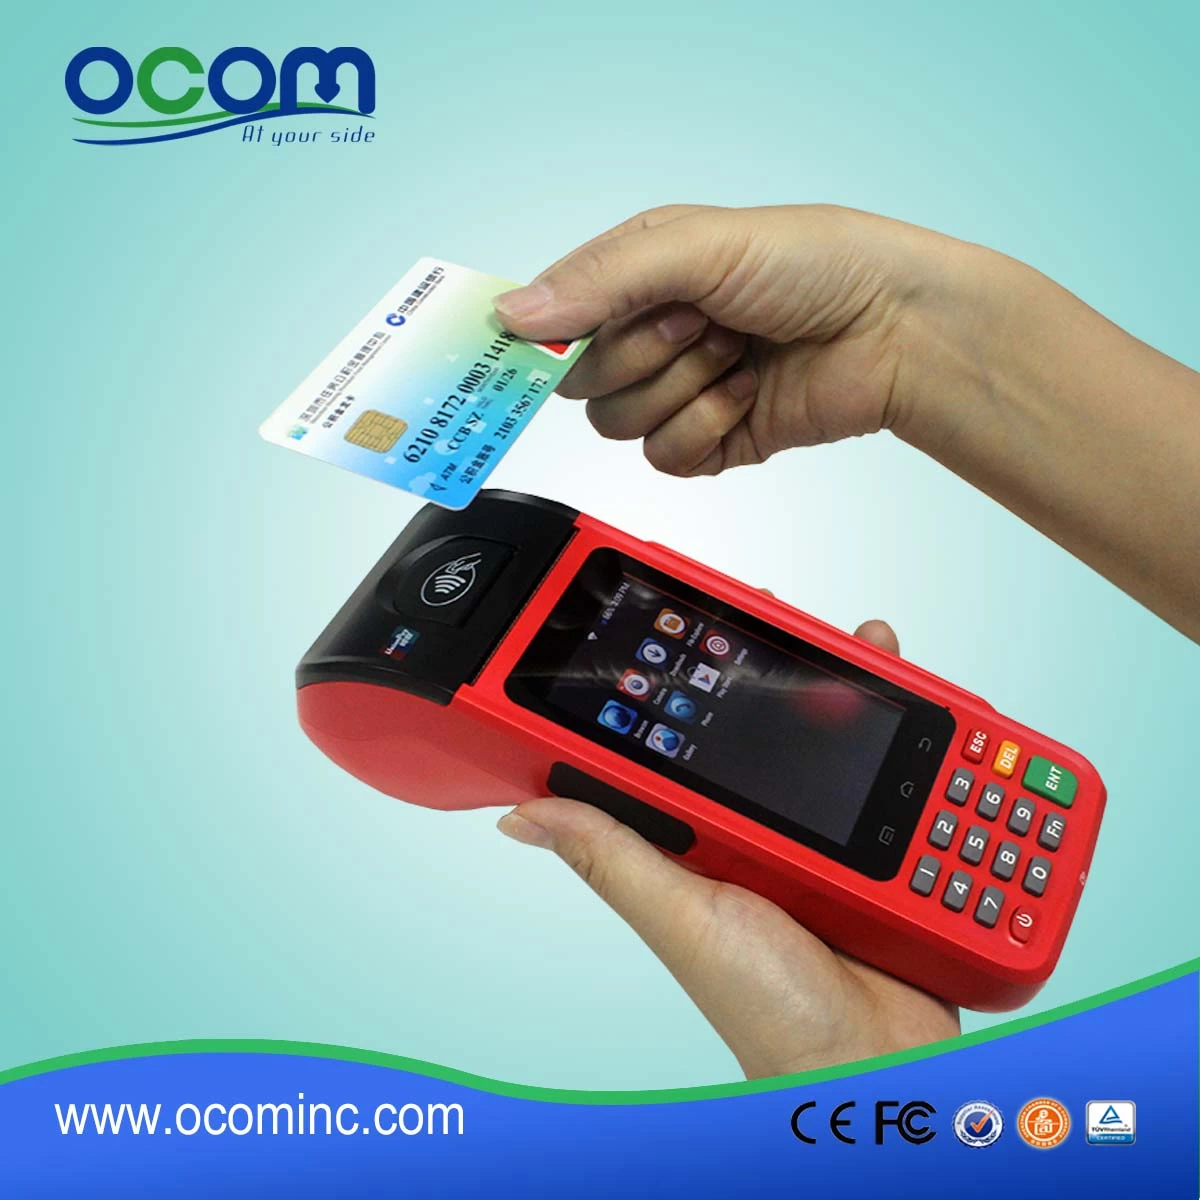 P8000S android mobile handheld pos contactless smart card reader